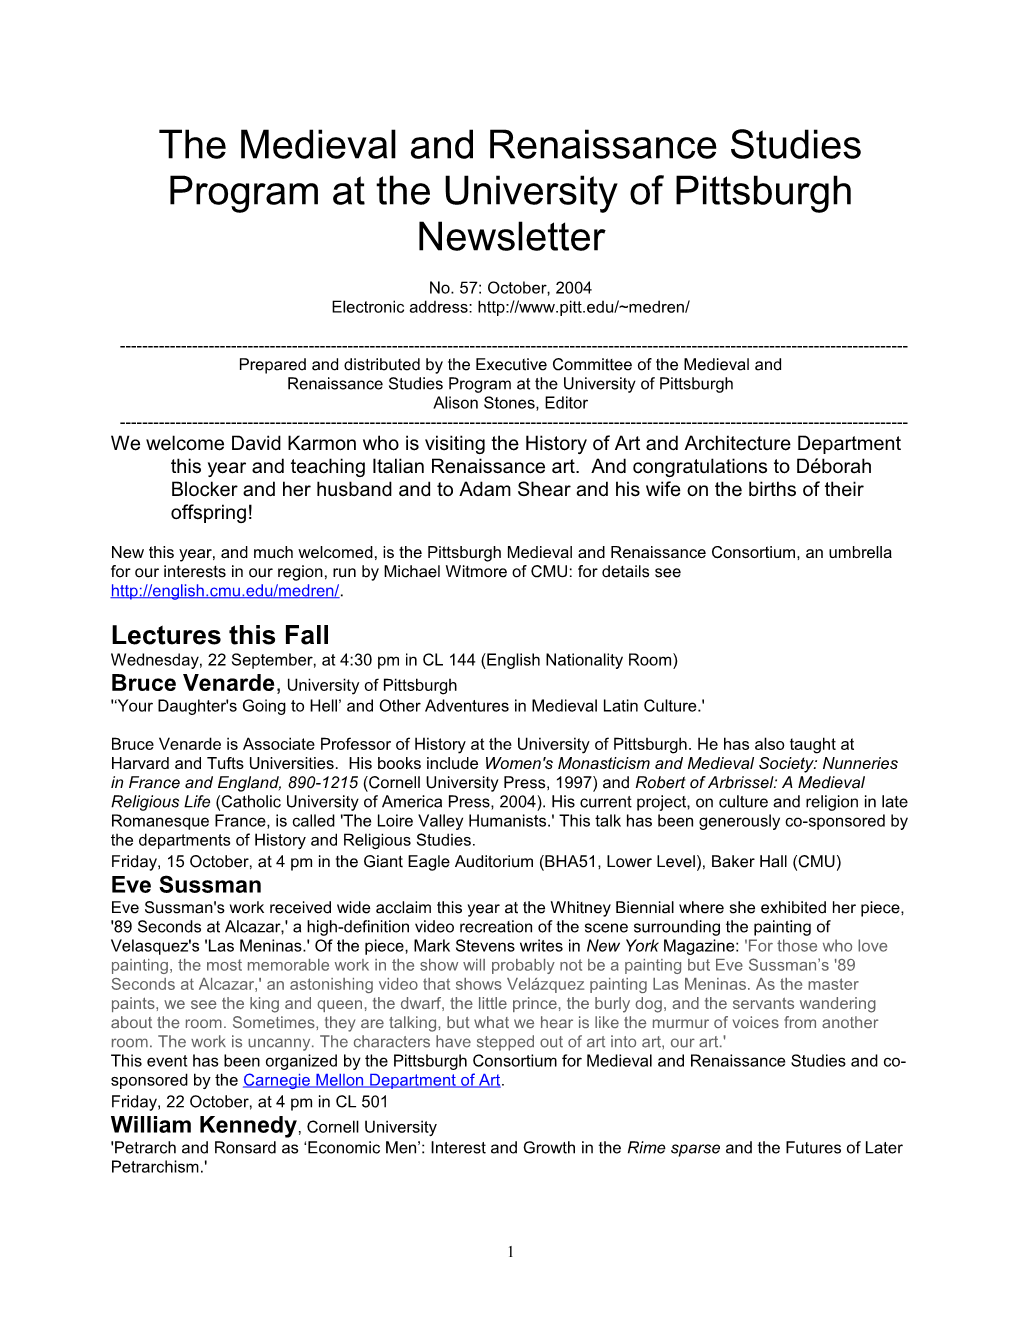 The Medieval and RENAISSANCE Studies Program at the University of Pittsburgh